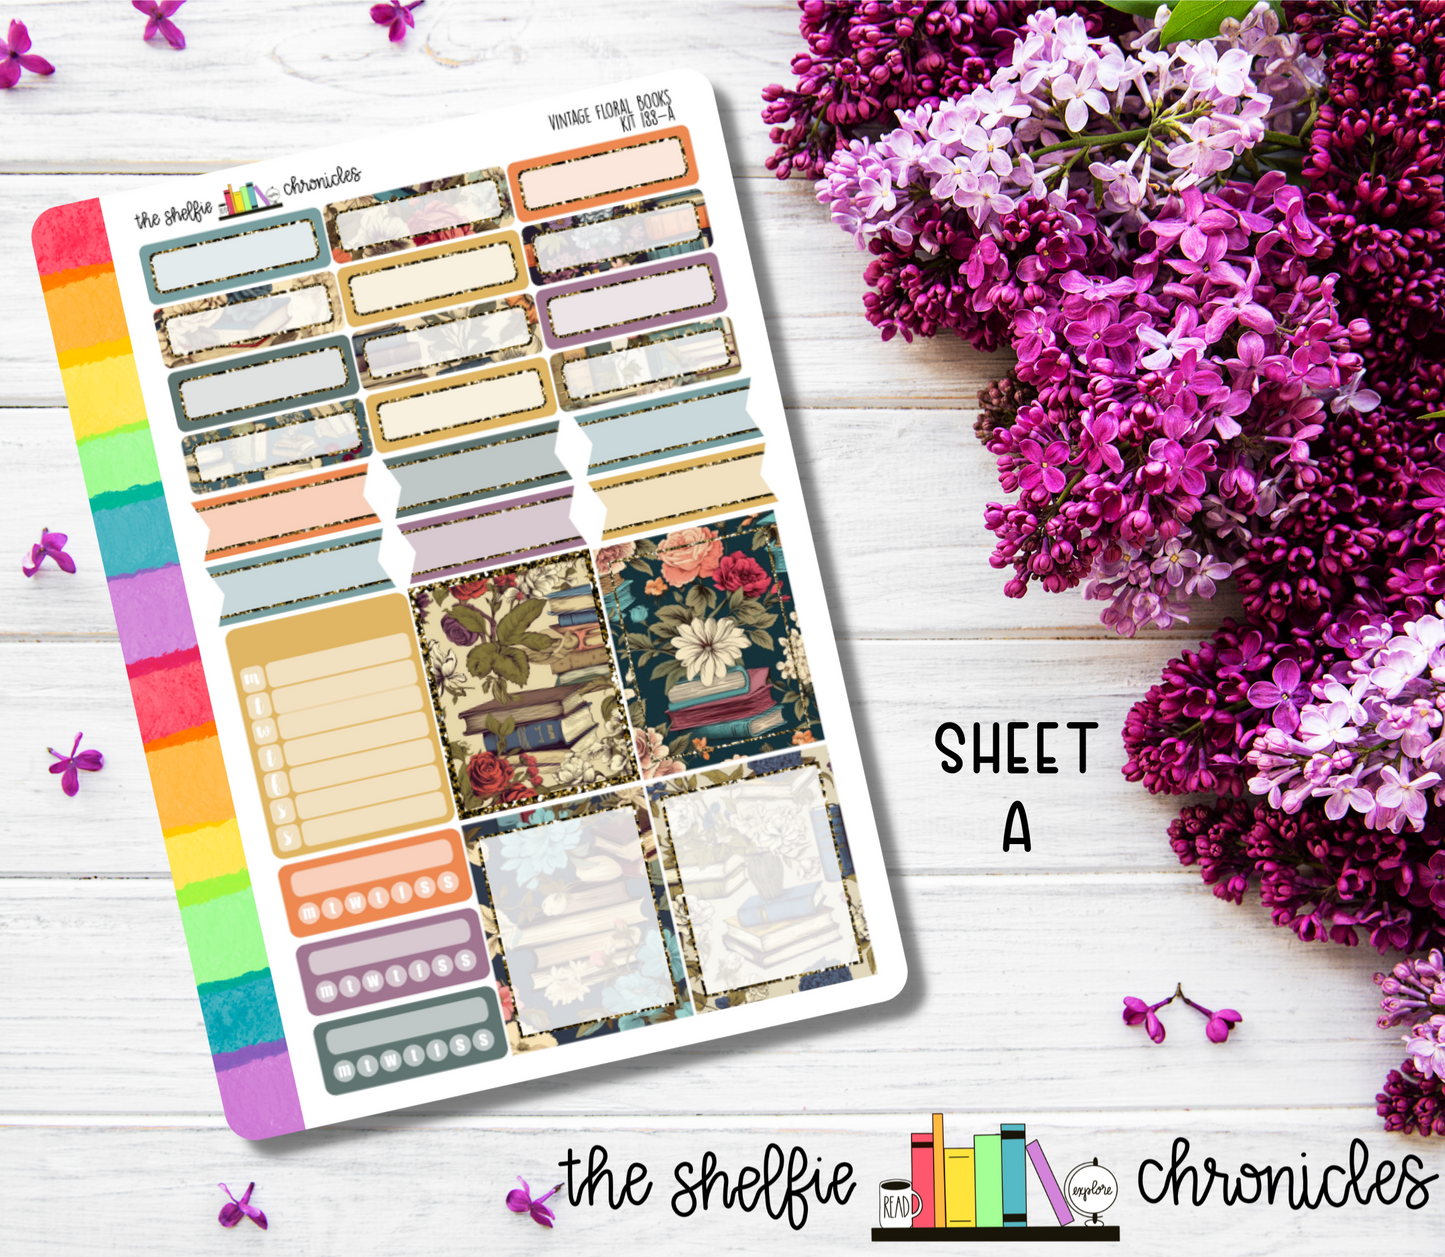 Kit 188 - Vintage Floral Books Weekly Kit - Die Cut Stickers - Repositionable Paper - Made To Fit 7x9 Planners